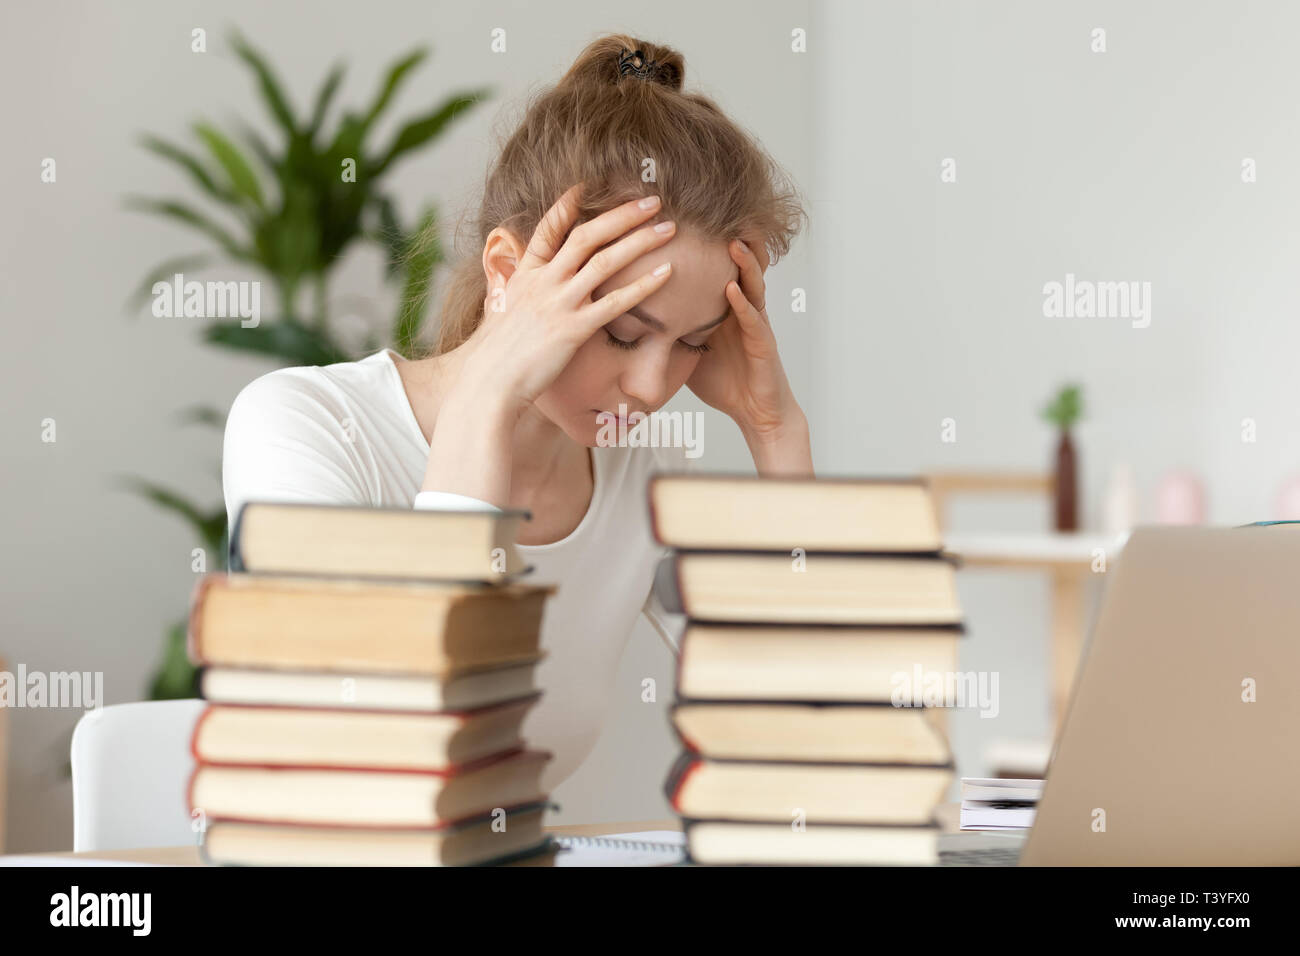 Upset woman sitting with closed eyes, annoyed by learning Stock Photo